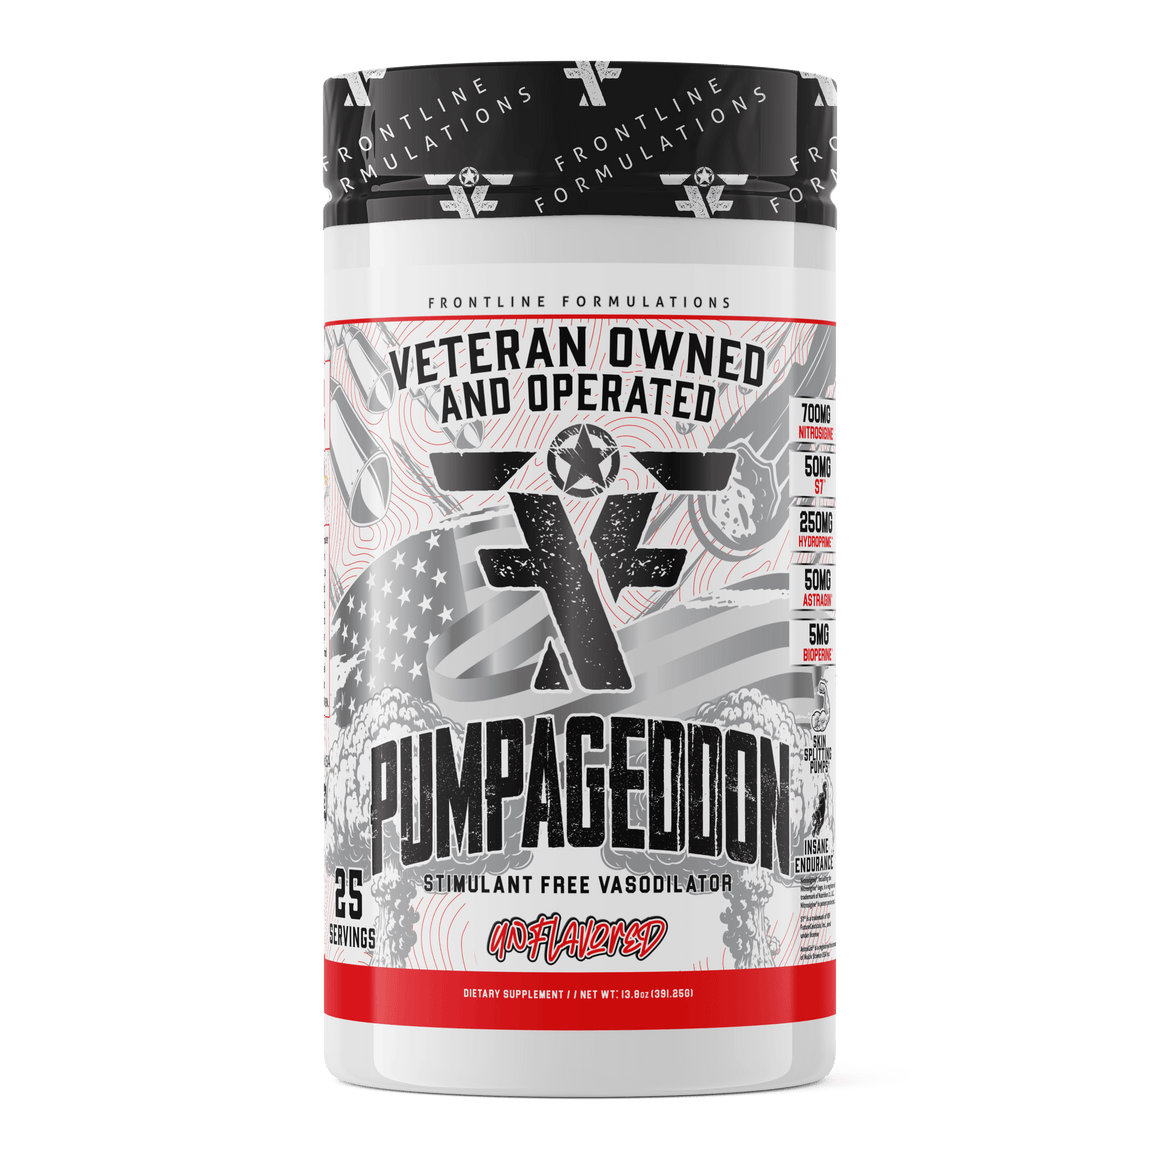 Frontline Formulations Pumpageddon Strap in! This concoction is for people that chase only the most ridiculous pumps! With a jaw dropping 7,000mg of L-Citruline Malate and key ingredients like nitrosigine, beta alanine and S7, this caffeine-free preworkou